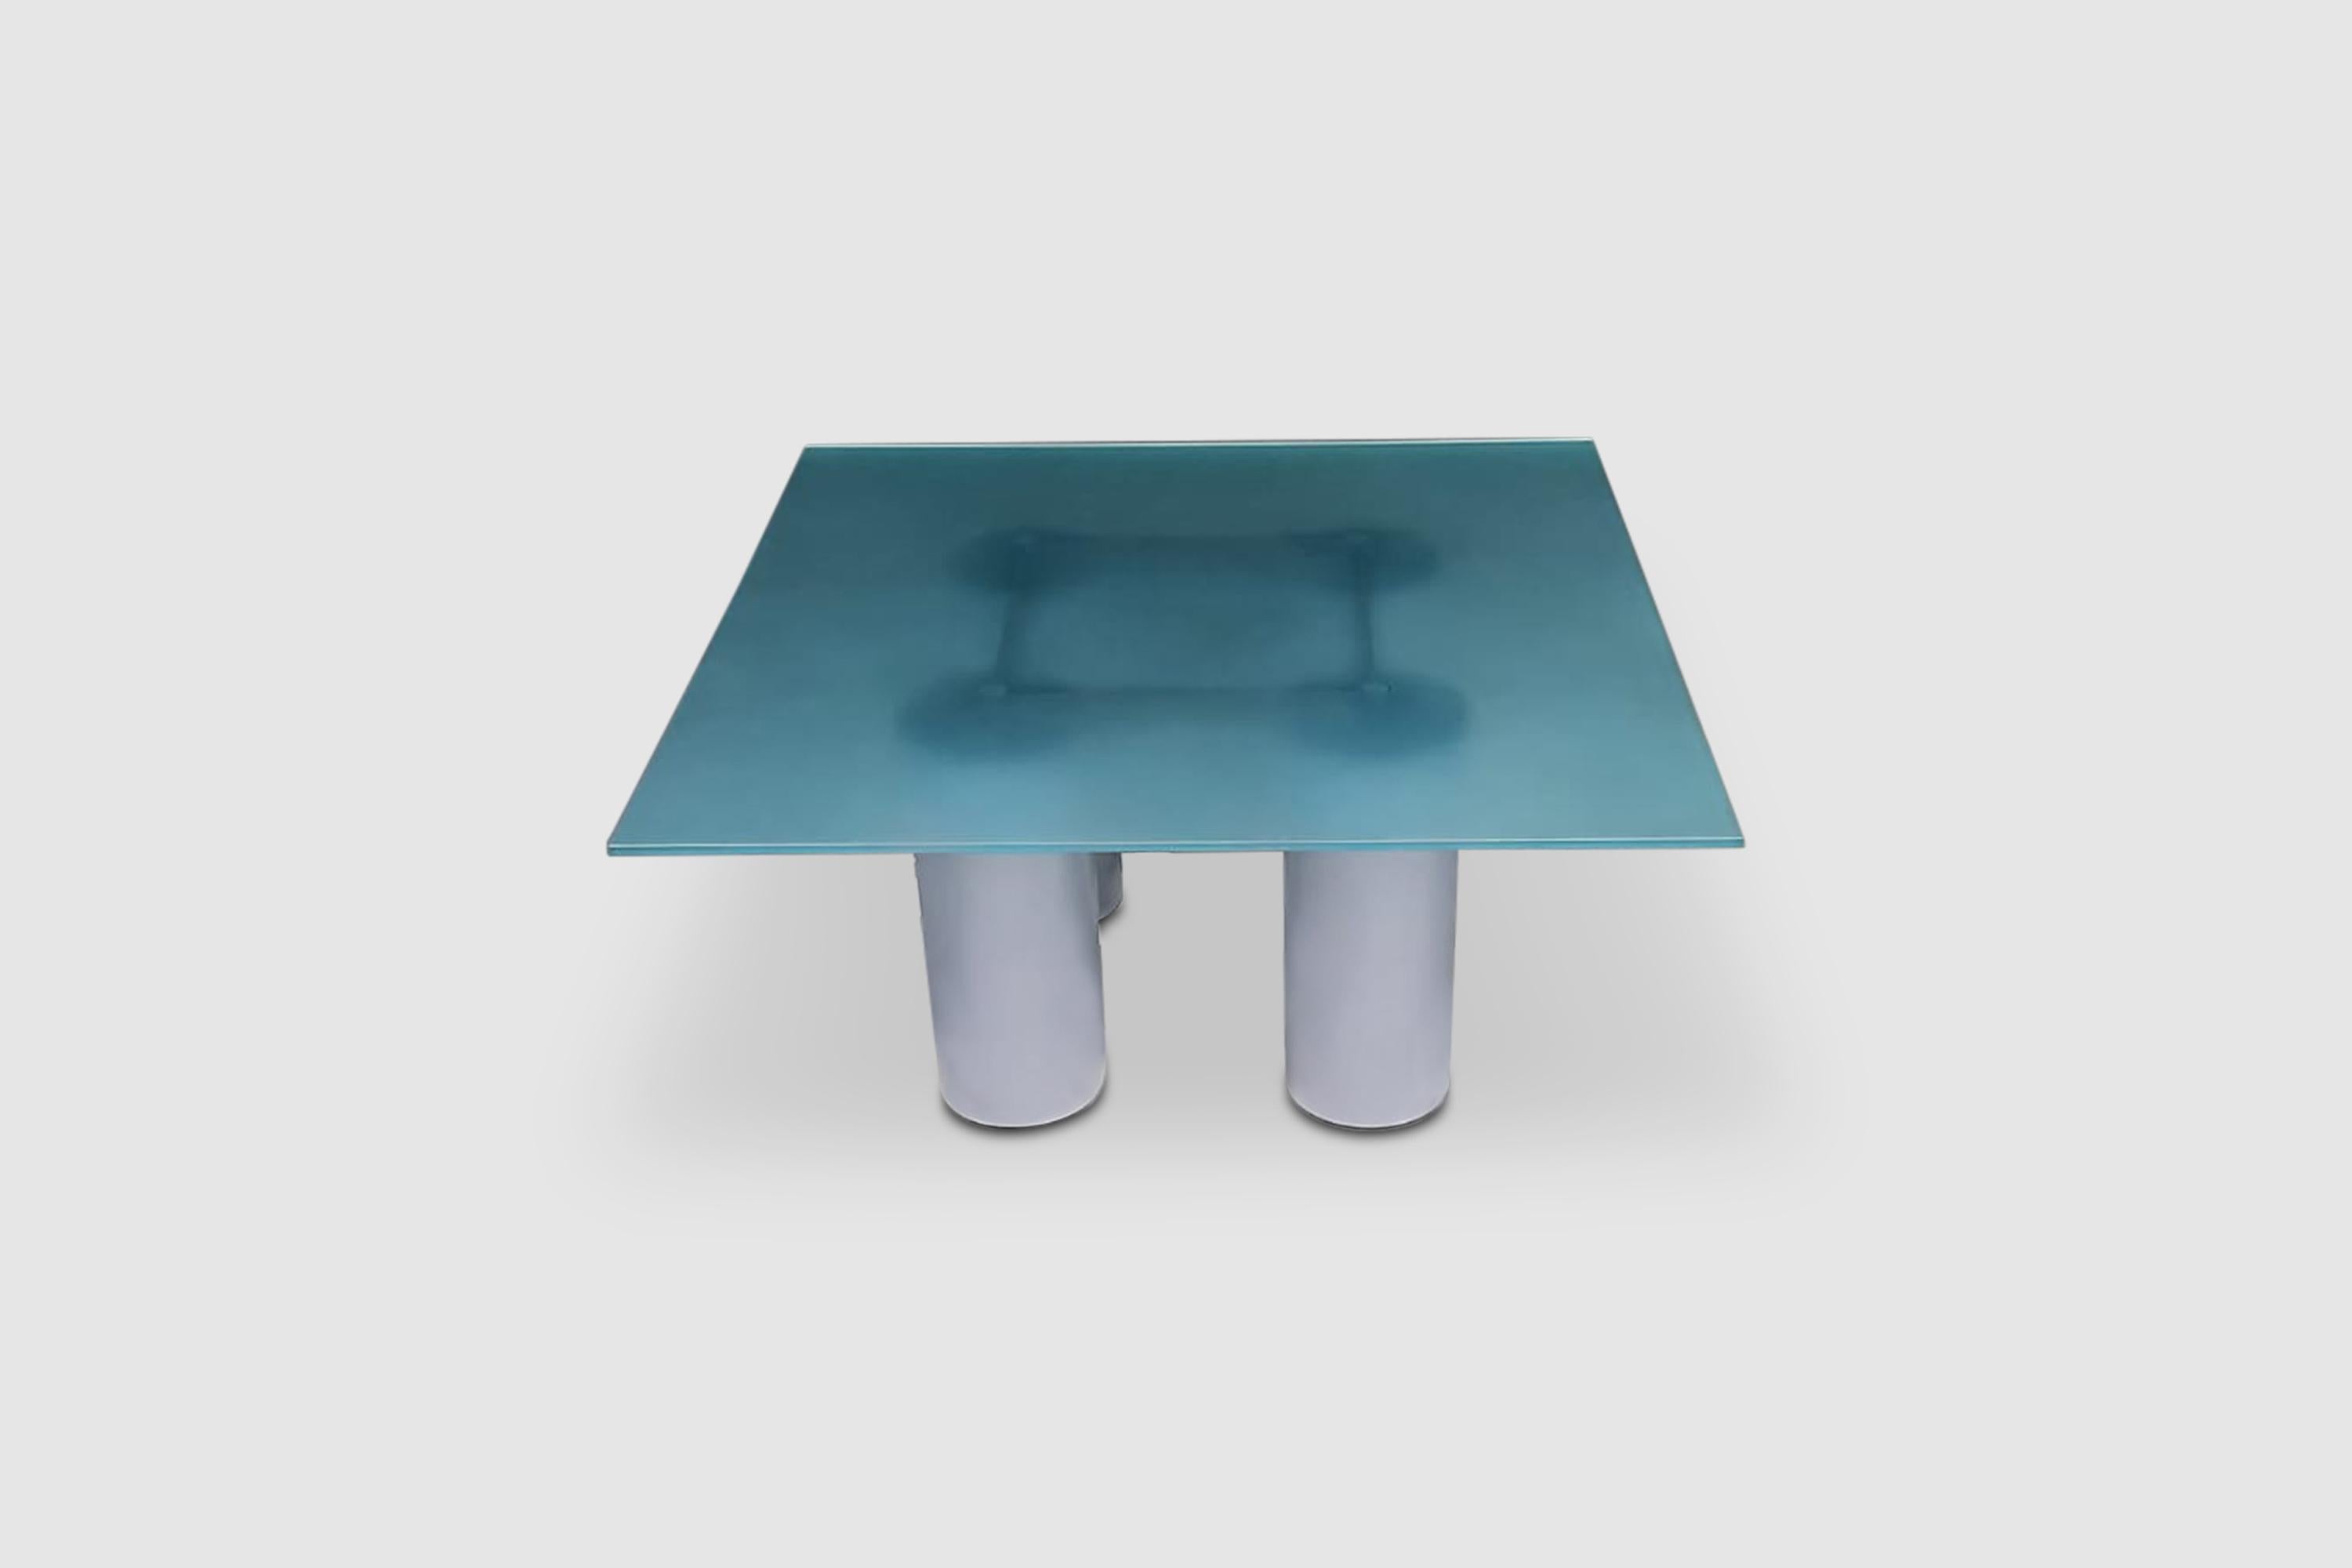 Serenissimo dining table by Lella & Massimo Vignelli for Acerbis 1980s For Sale 3